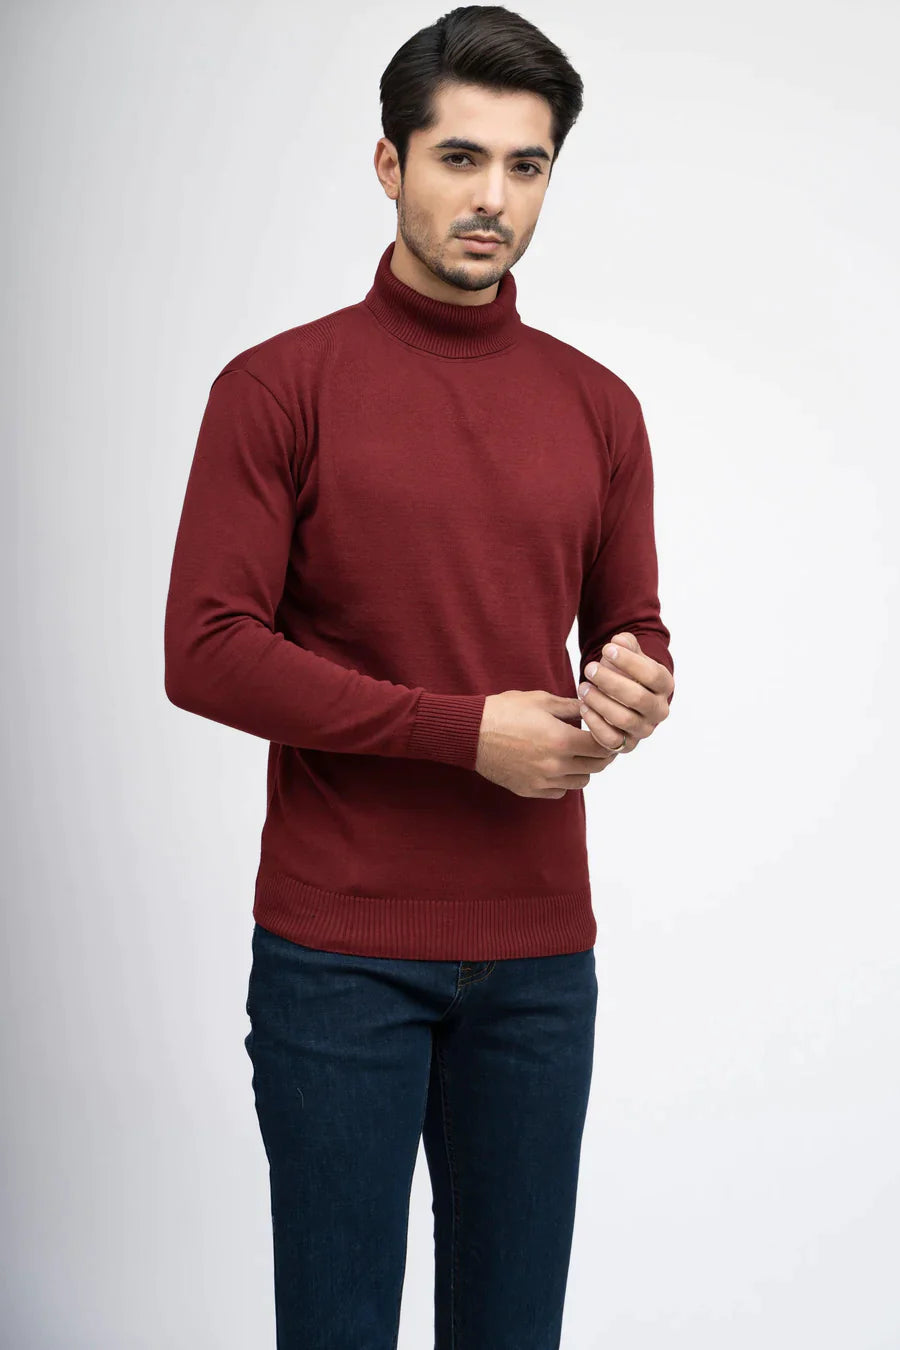 Sweaters For Men | Men’s Sweaters & Turtlenecks at Charcoal Clothing